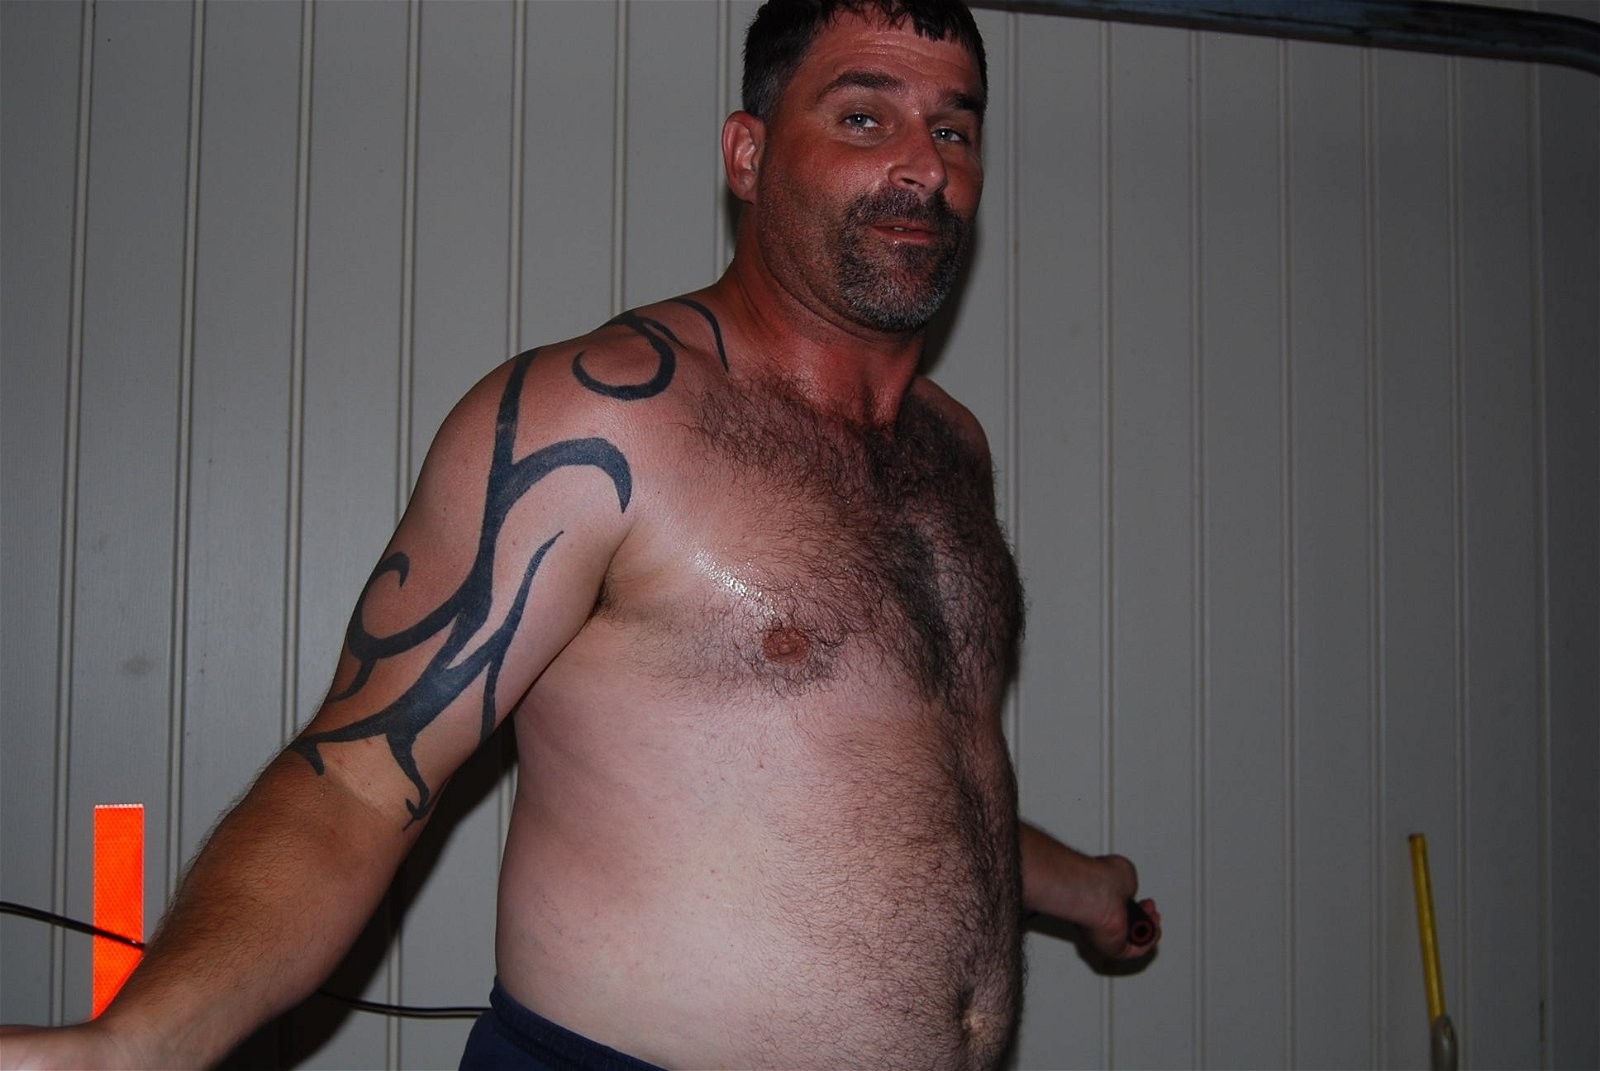 Photo by Hairy Musclebears with the username @hairymusclebears,  September 24, 2019 at 3:27 AM. The post is about the topic GayTumblr and the text says 'hairychest Manly Macho Man from USAFUR.com galleries  #gaybody #gaygames #gayguys #gaymale #gayhunk #hairybelly #BearPhotoADay #gaychubby #gay #bearweek365  #pop #papi #grandpa #grandfather #silverdaddy #silverfox #hairybelly #chub #chubby #husband..'